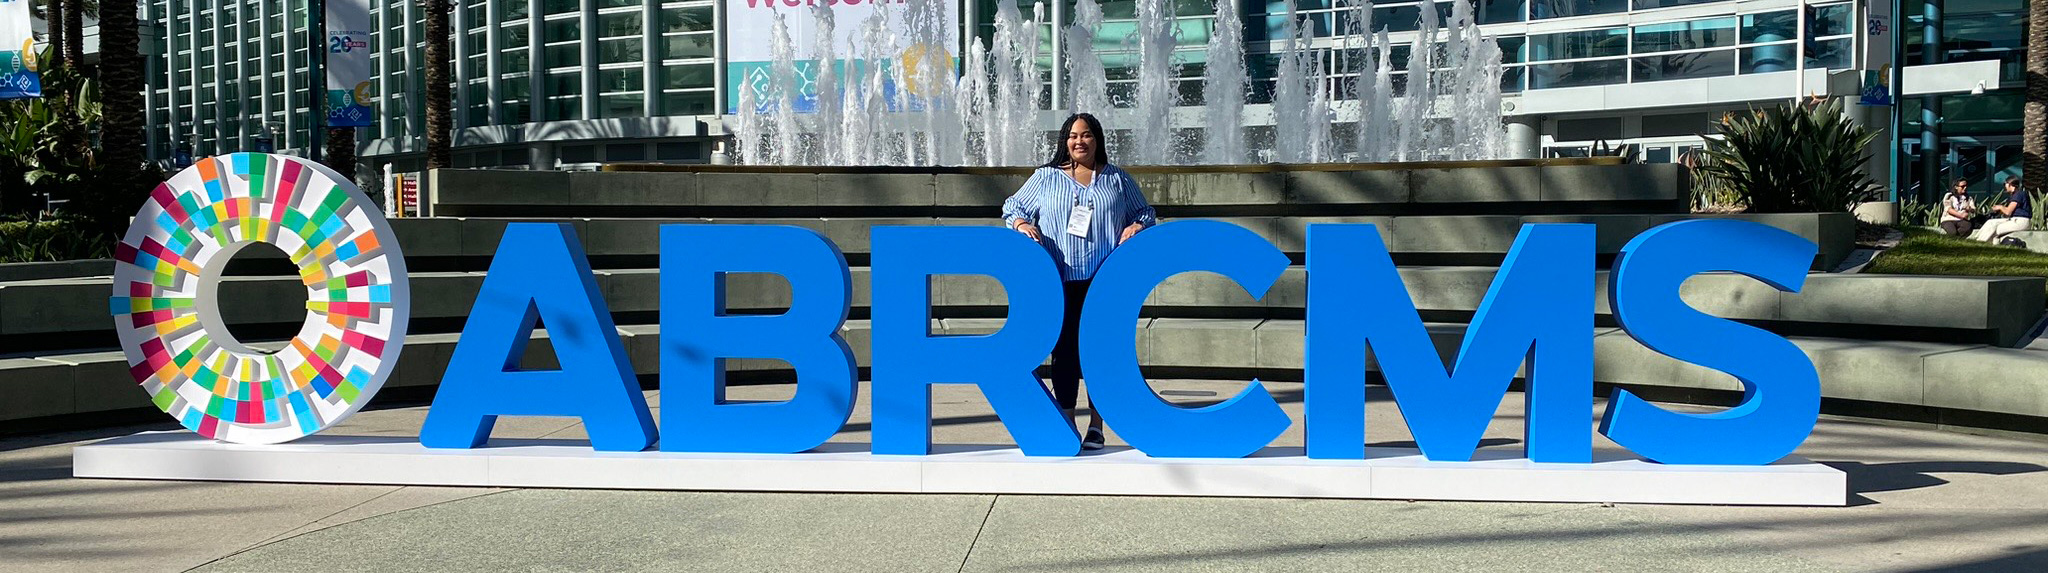 Hannah Michael at the ABRCMS conference in California